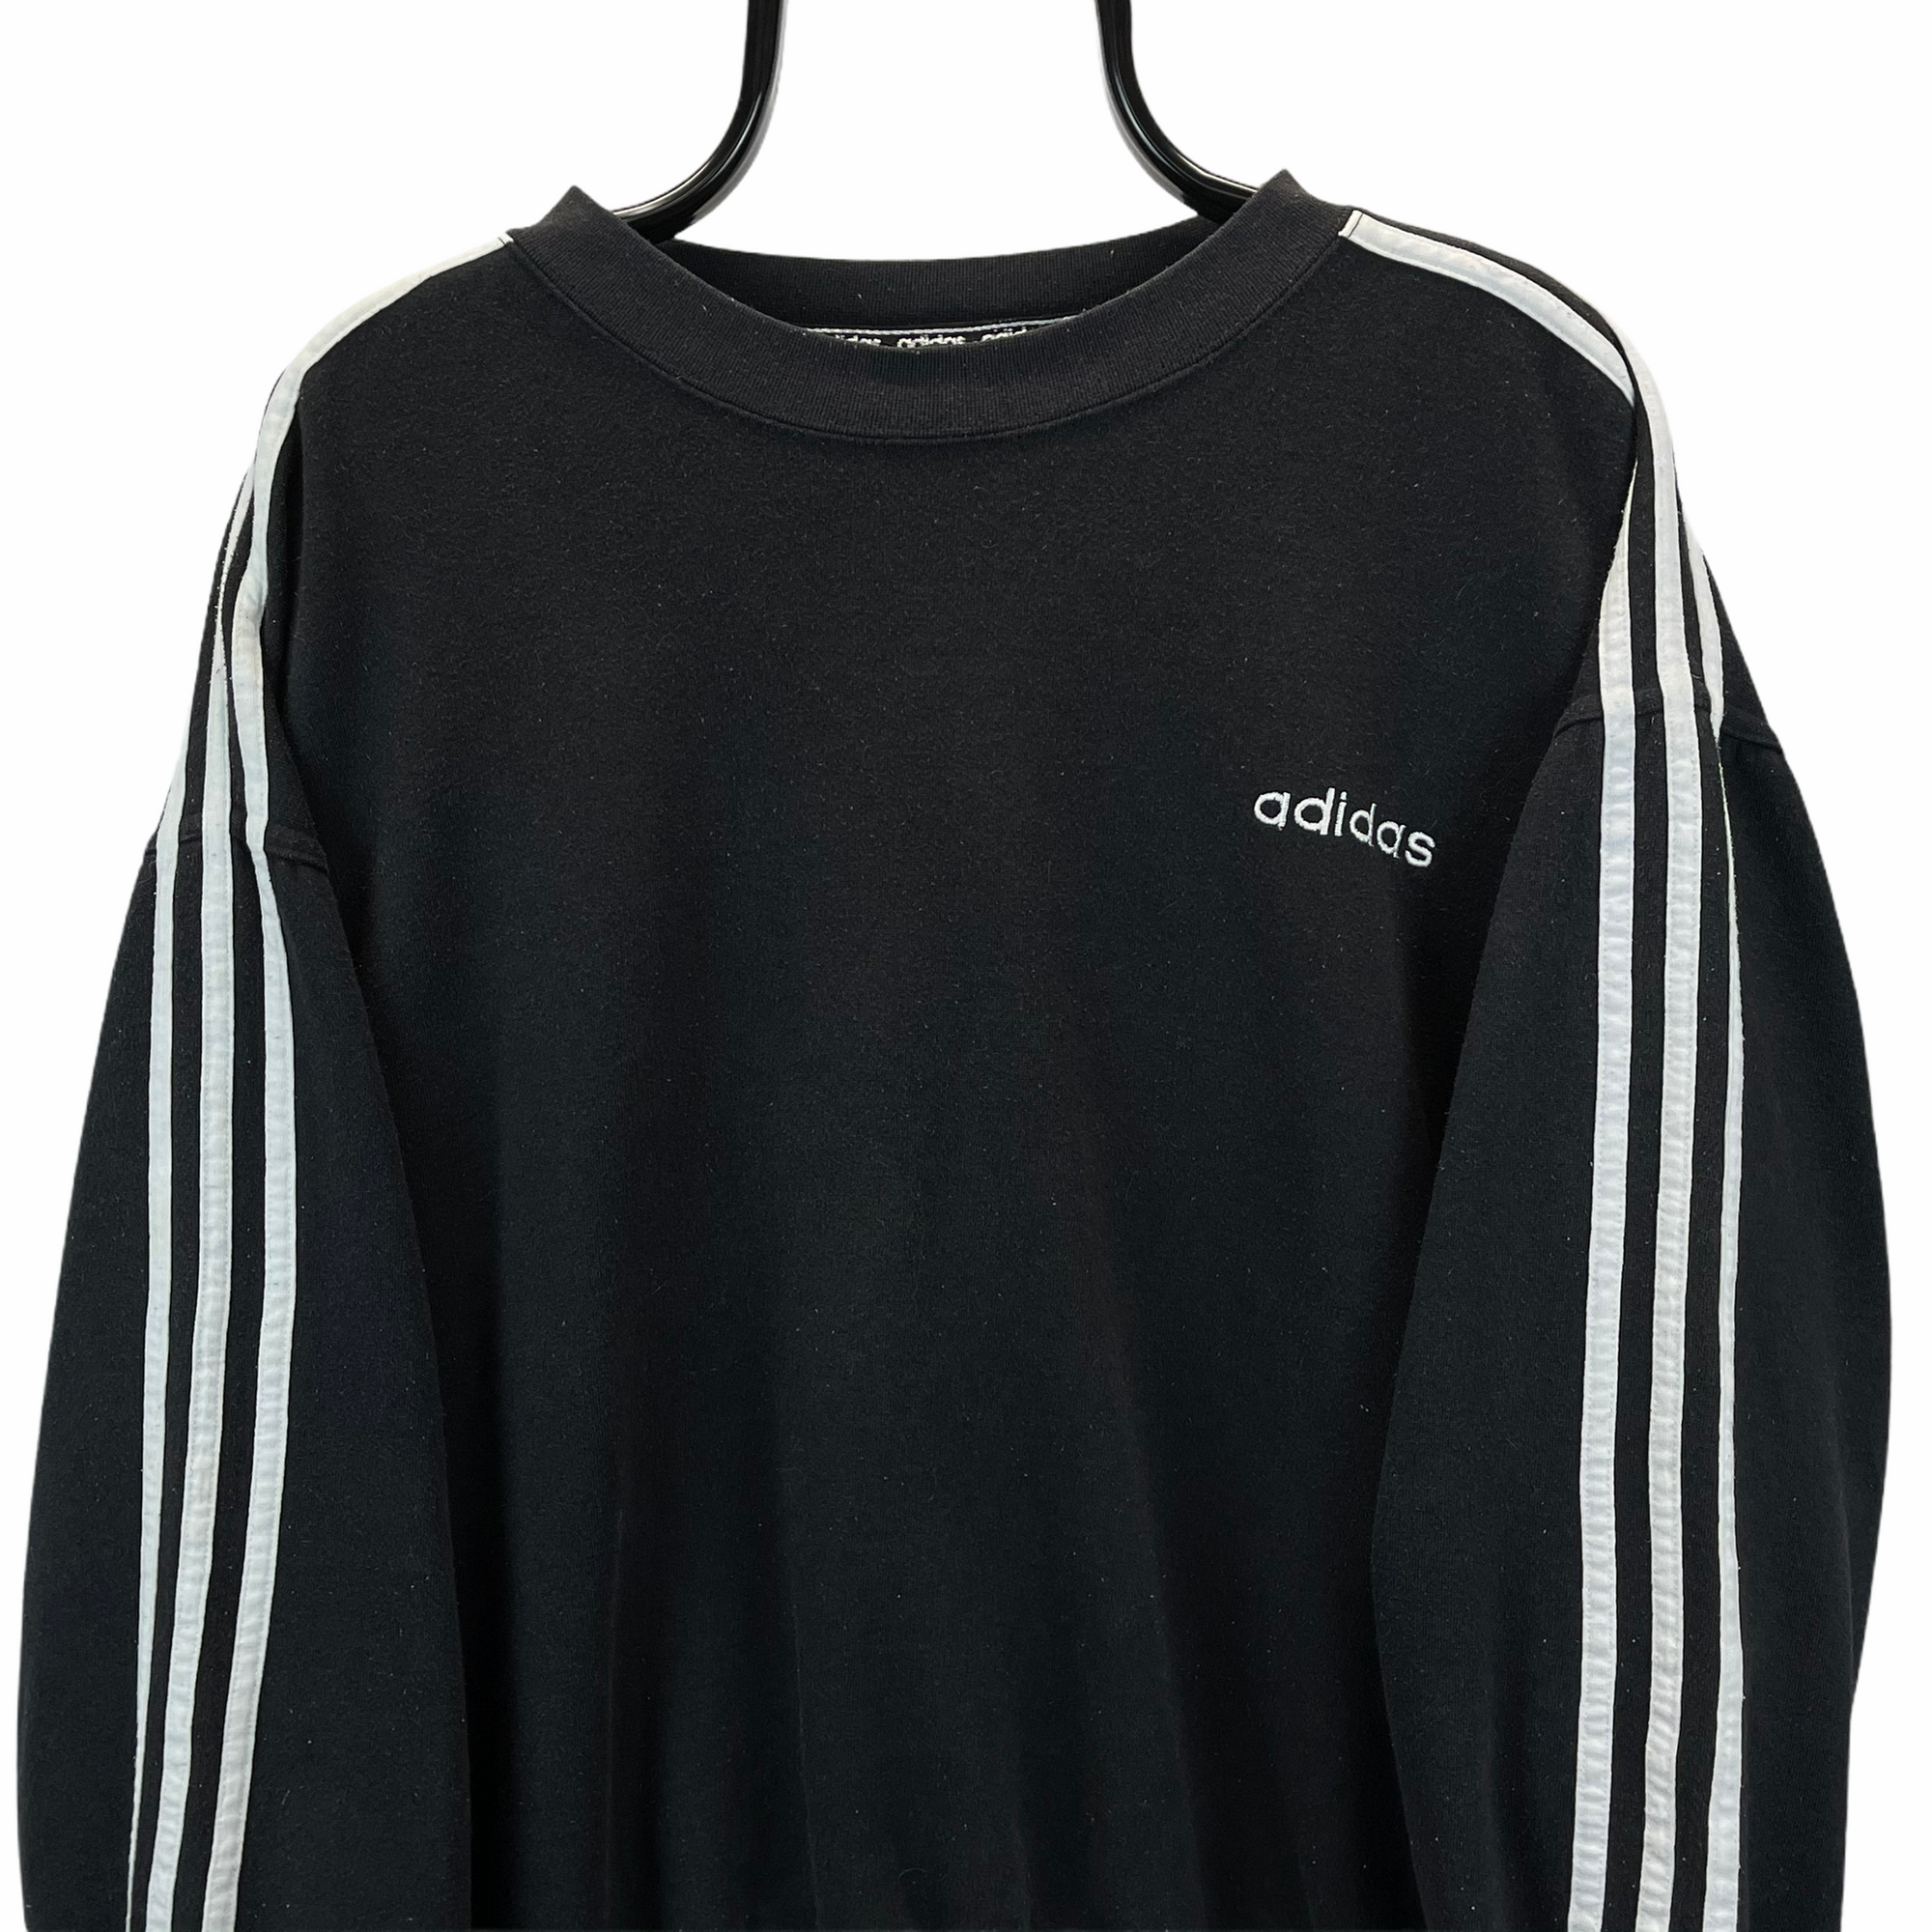 VINTAGE 80S ADIDAS EMBROIDERED SMALL SPELLOUT SWEATSHIRT IN BLACK & WHITE - MEN'S MEDIUM/WOMEN'S LARGE